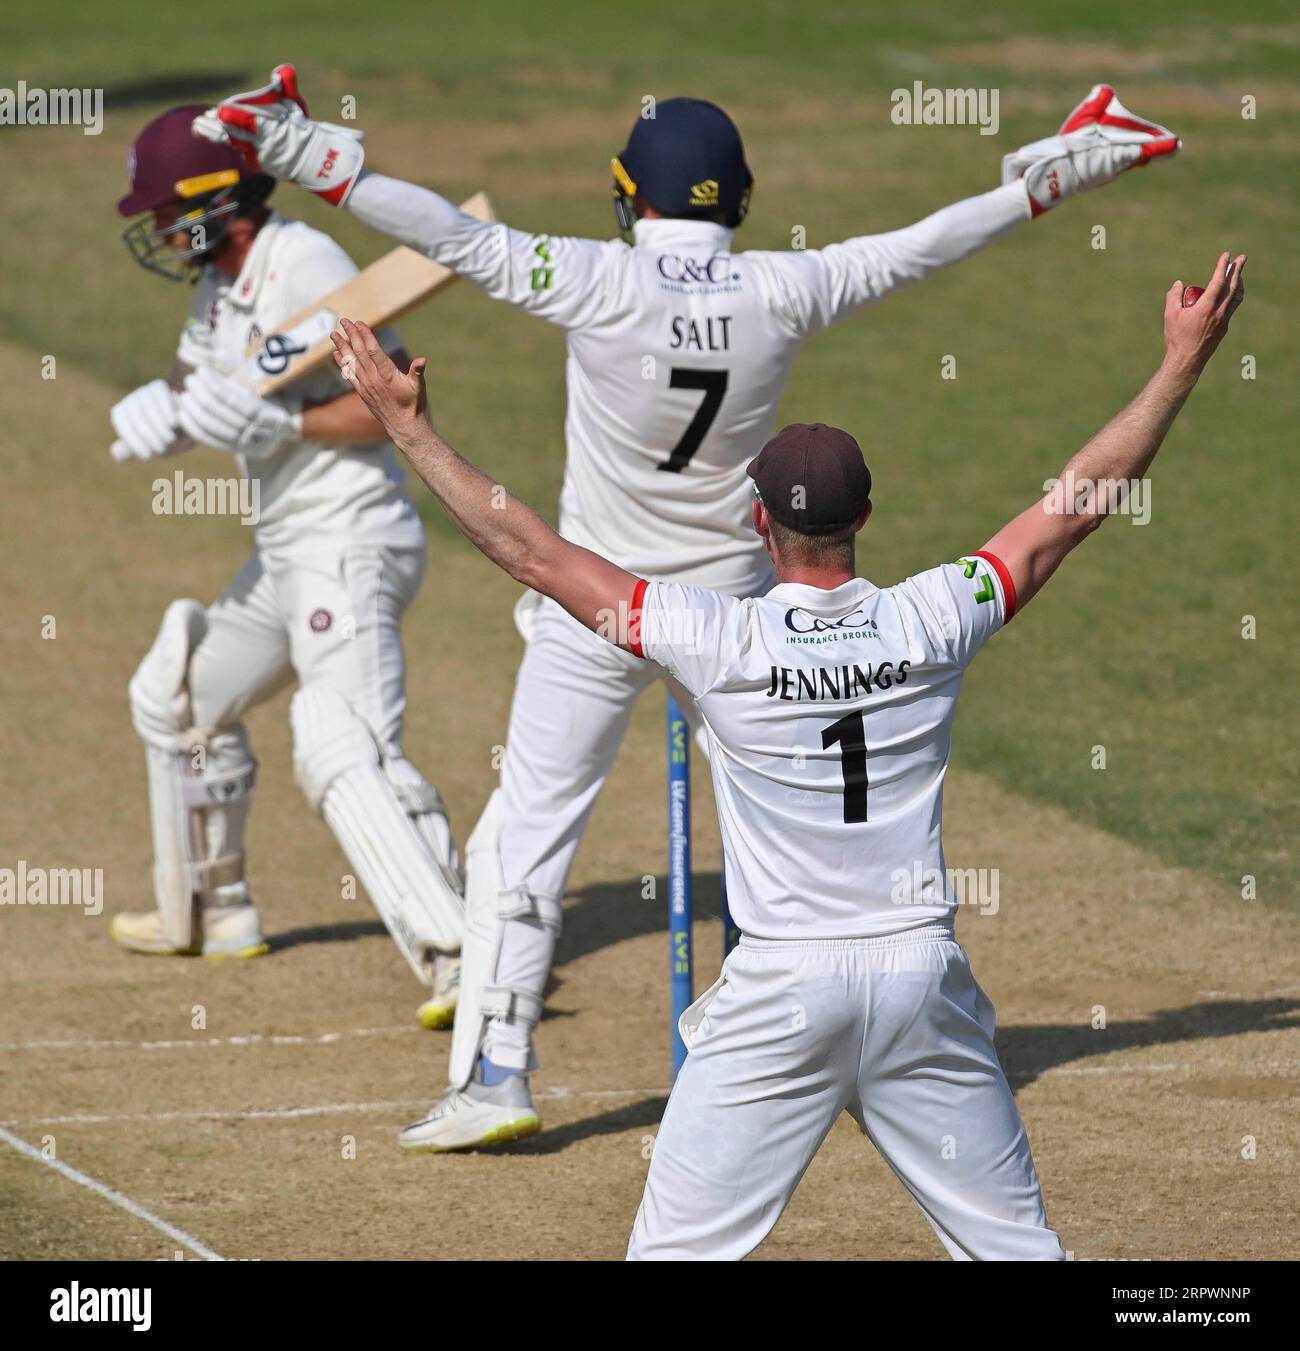 NORTHAMPTON, ENGLAND -  Sept 5 : Phil Salt and Keaton Jennings of Lancashire unsuccessfully appeals to the umpire for the wicket of  Sam Whiteman of Northamptonshire Day 3 of the LV= Insurance County Championship match between Northamptonshire and Lancashire at The County Ground  in Northampton, England. Stock Photo